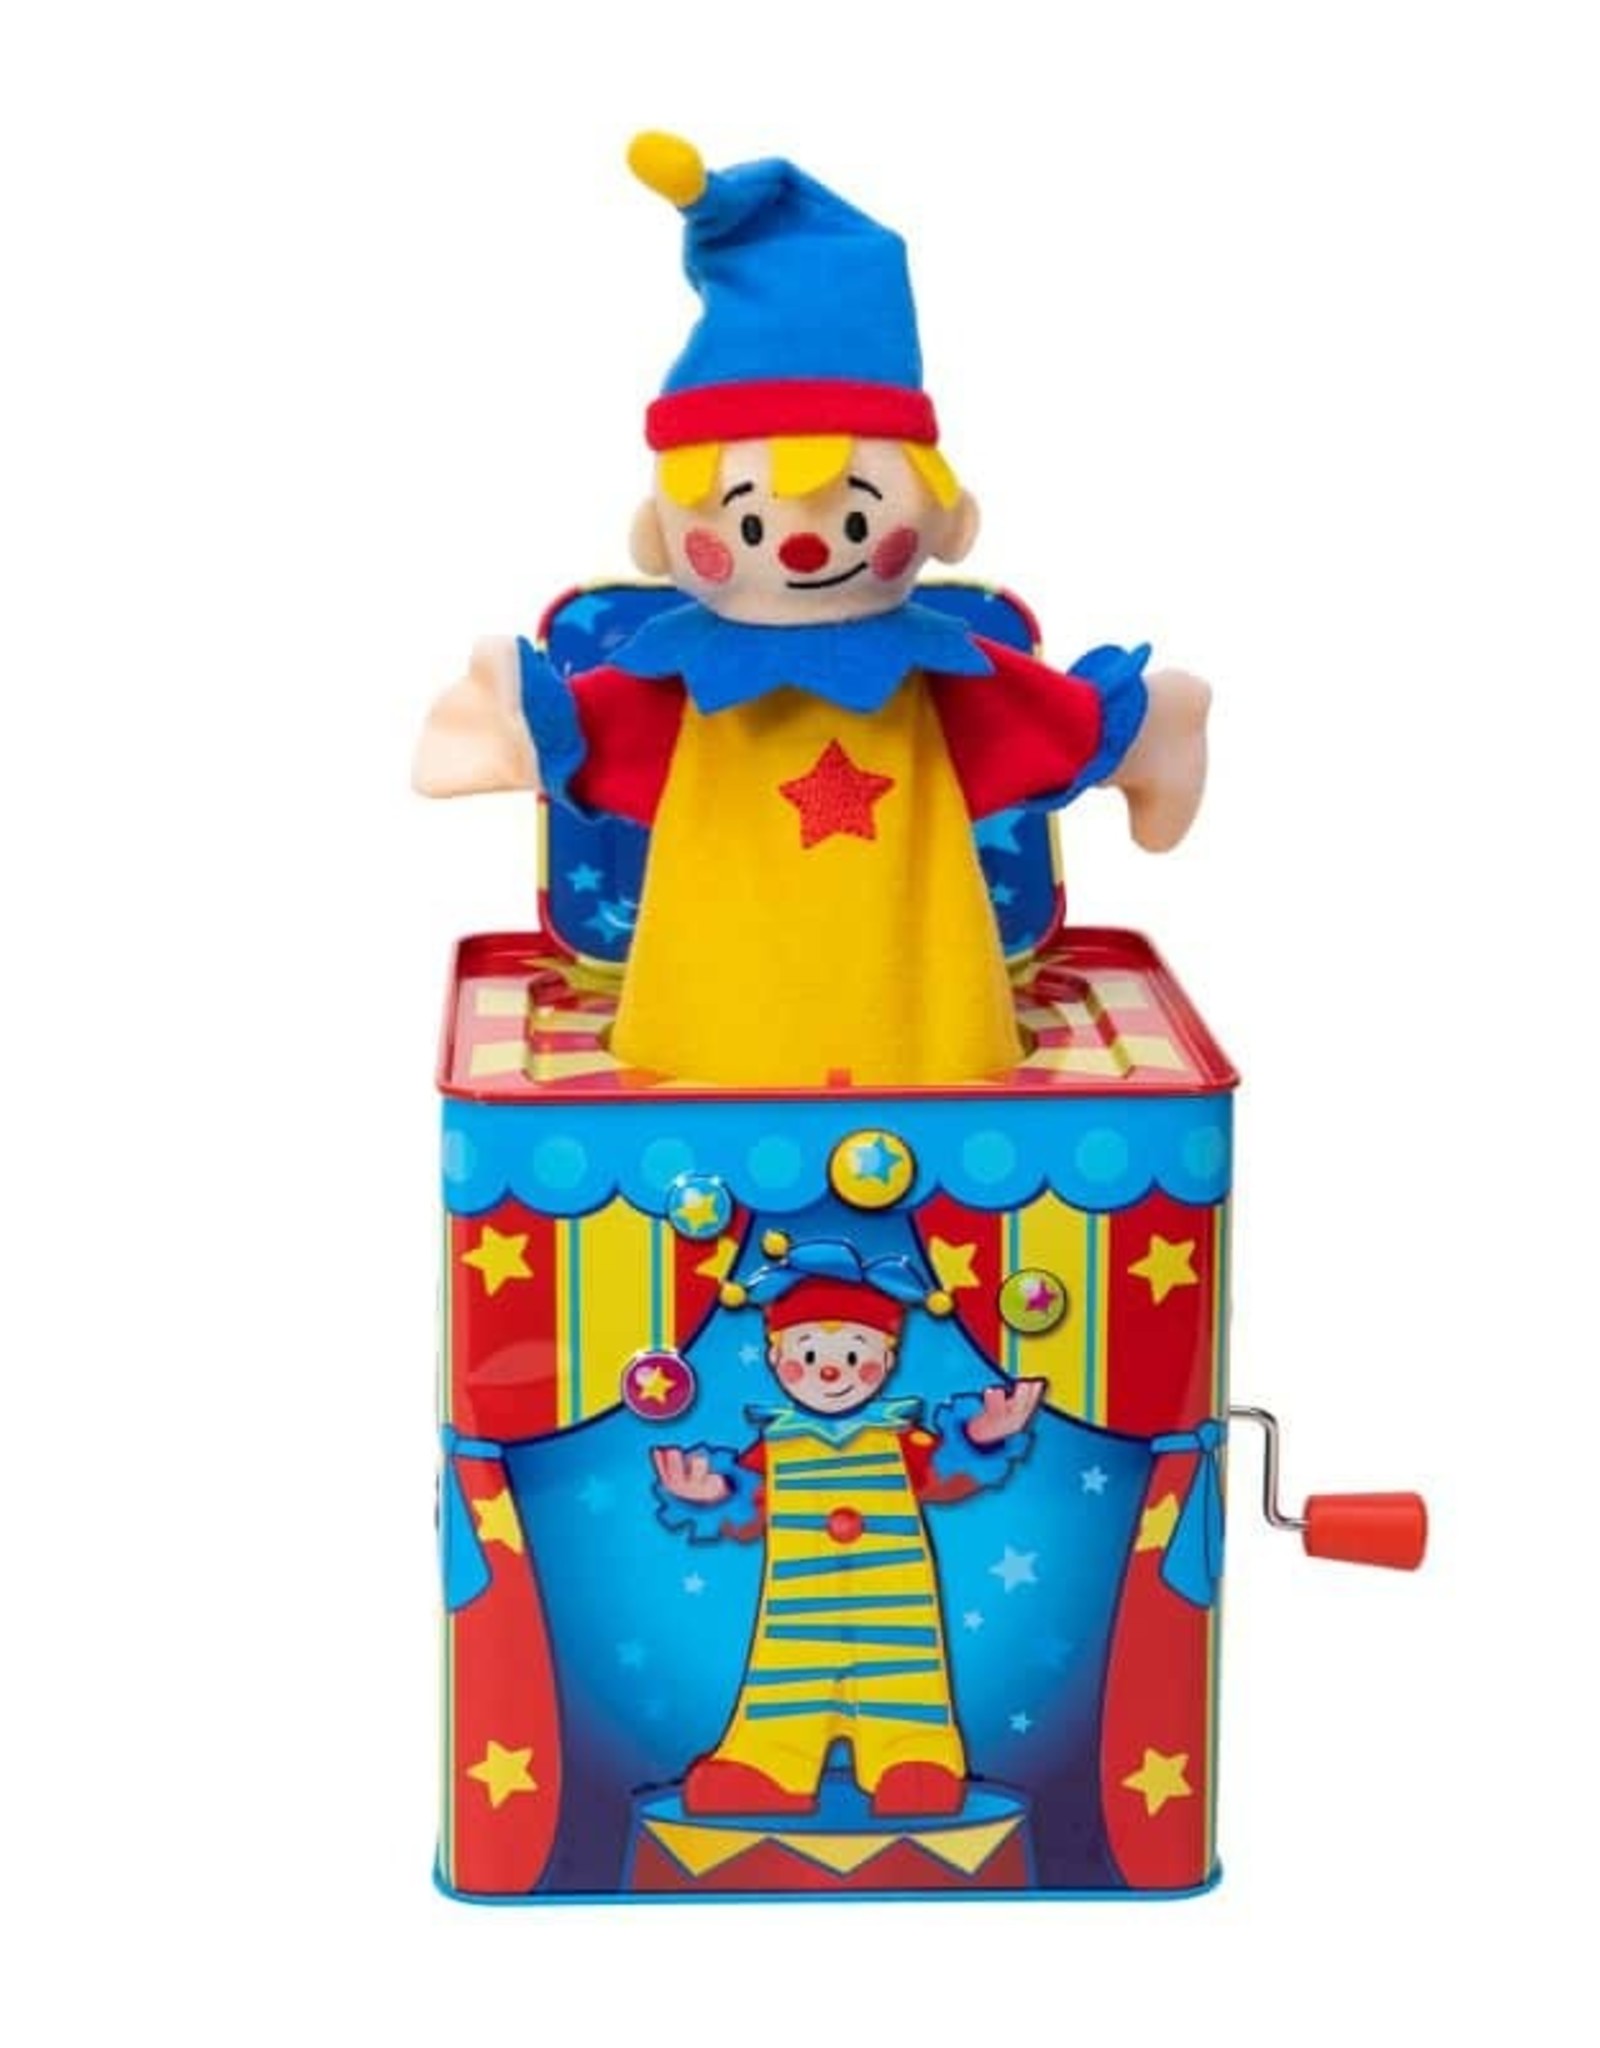 Schylling SILLY CIRCUS JACK IN BOX